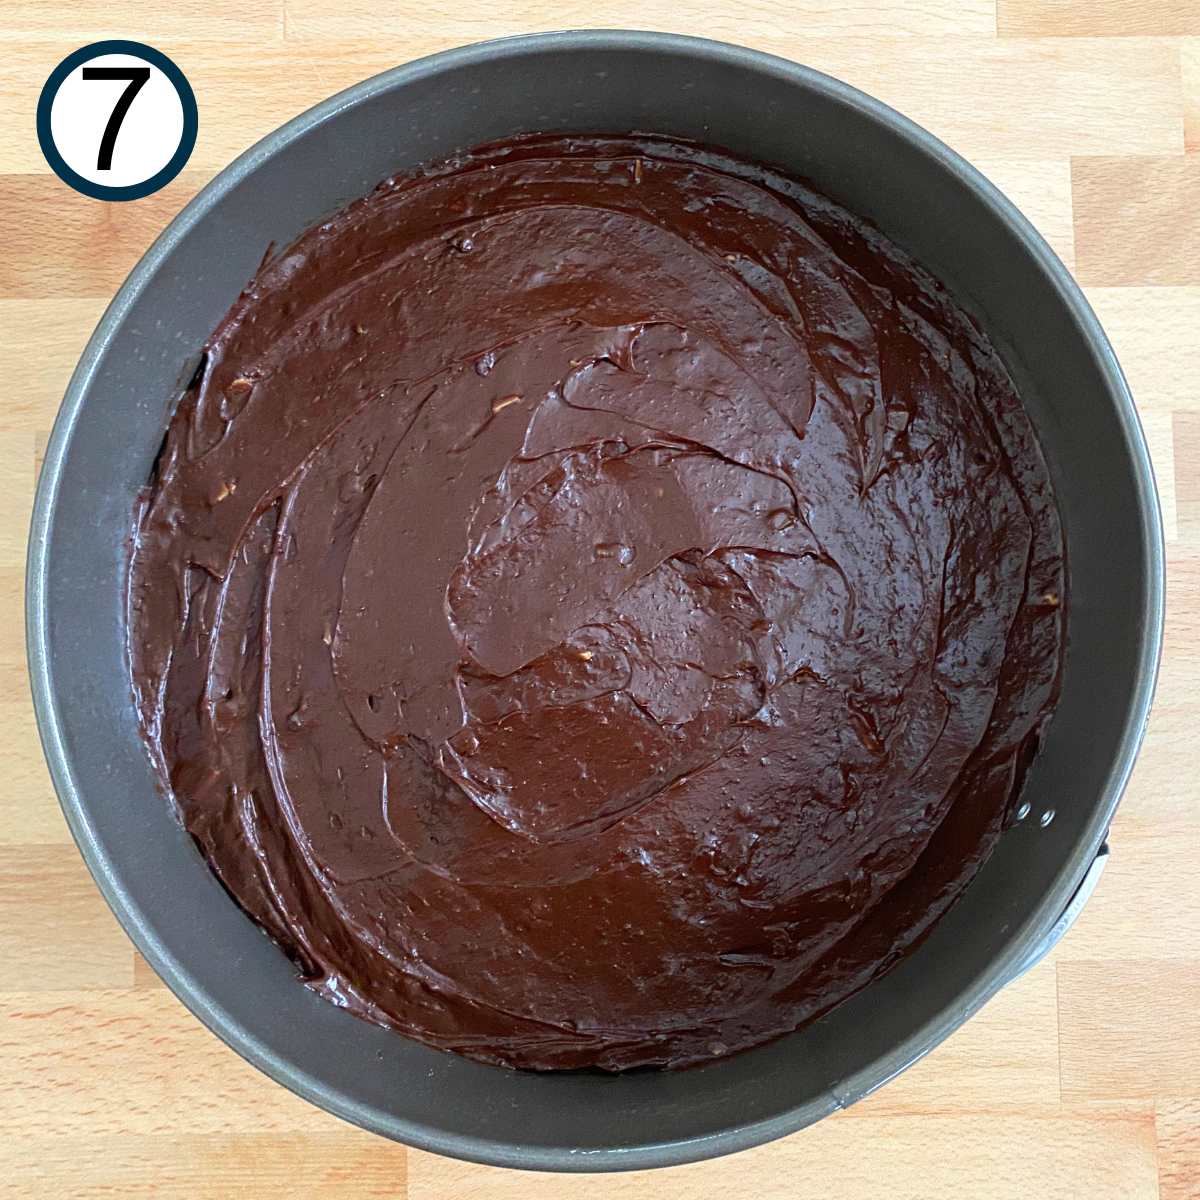 Uncooked flourless chocolate cake batter spread into a springform pan.